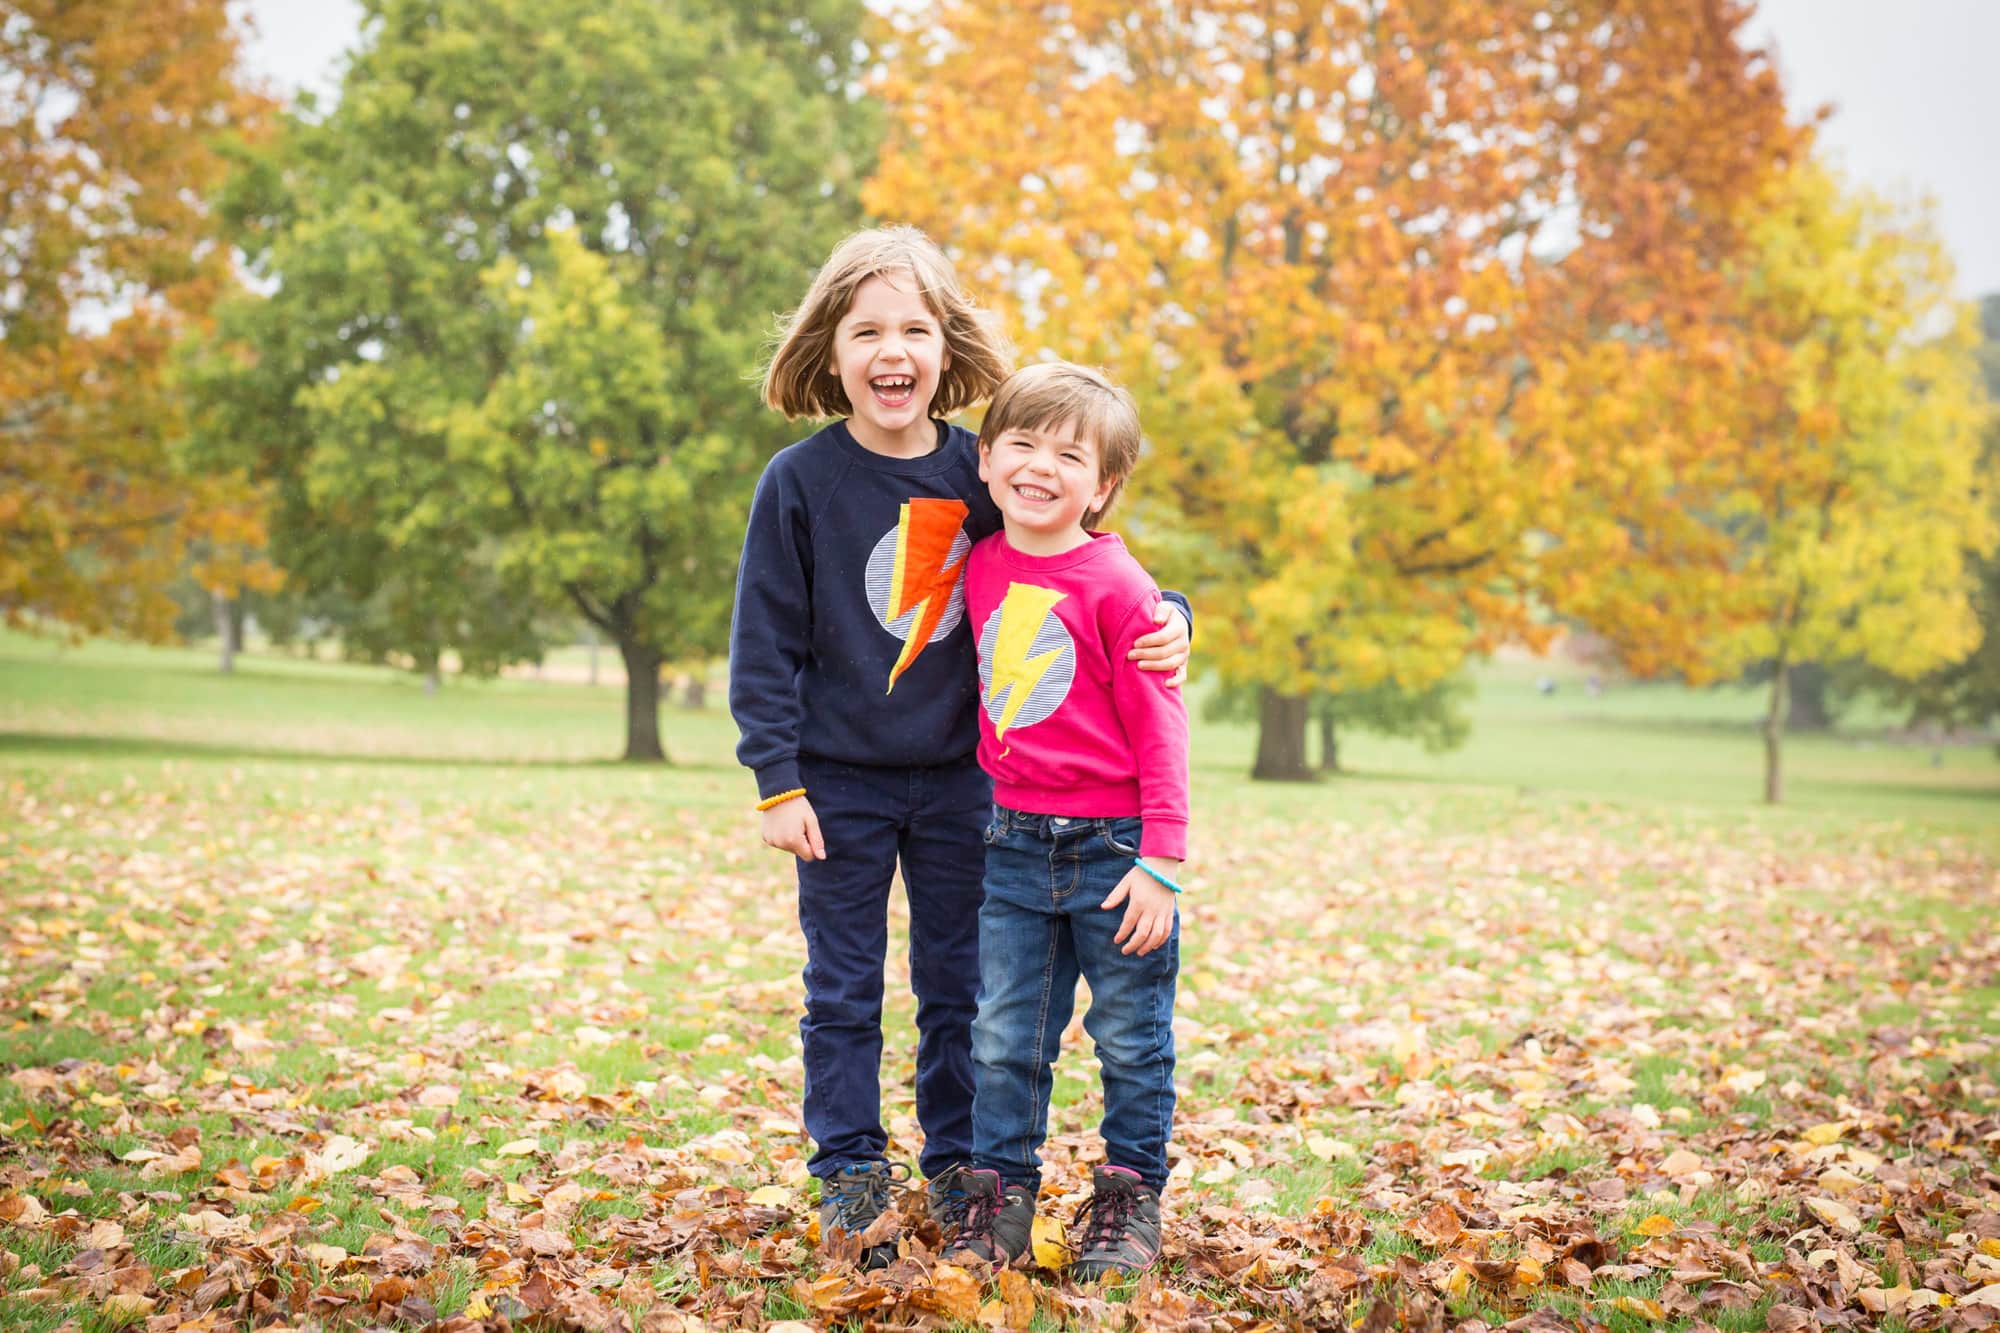 Siblings cuddling in the park in autumn taken by Beckenham photographer